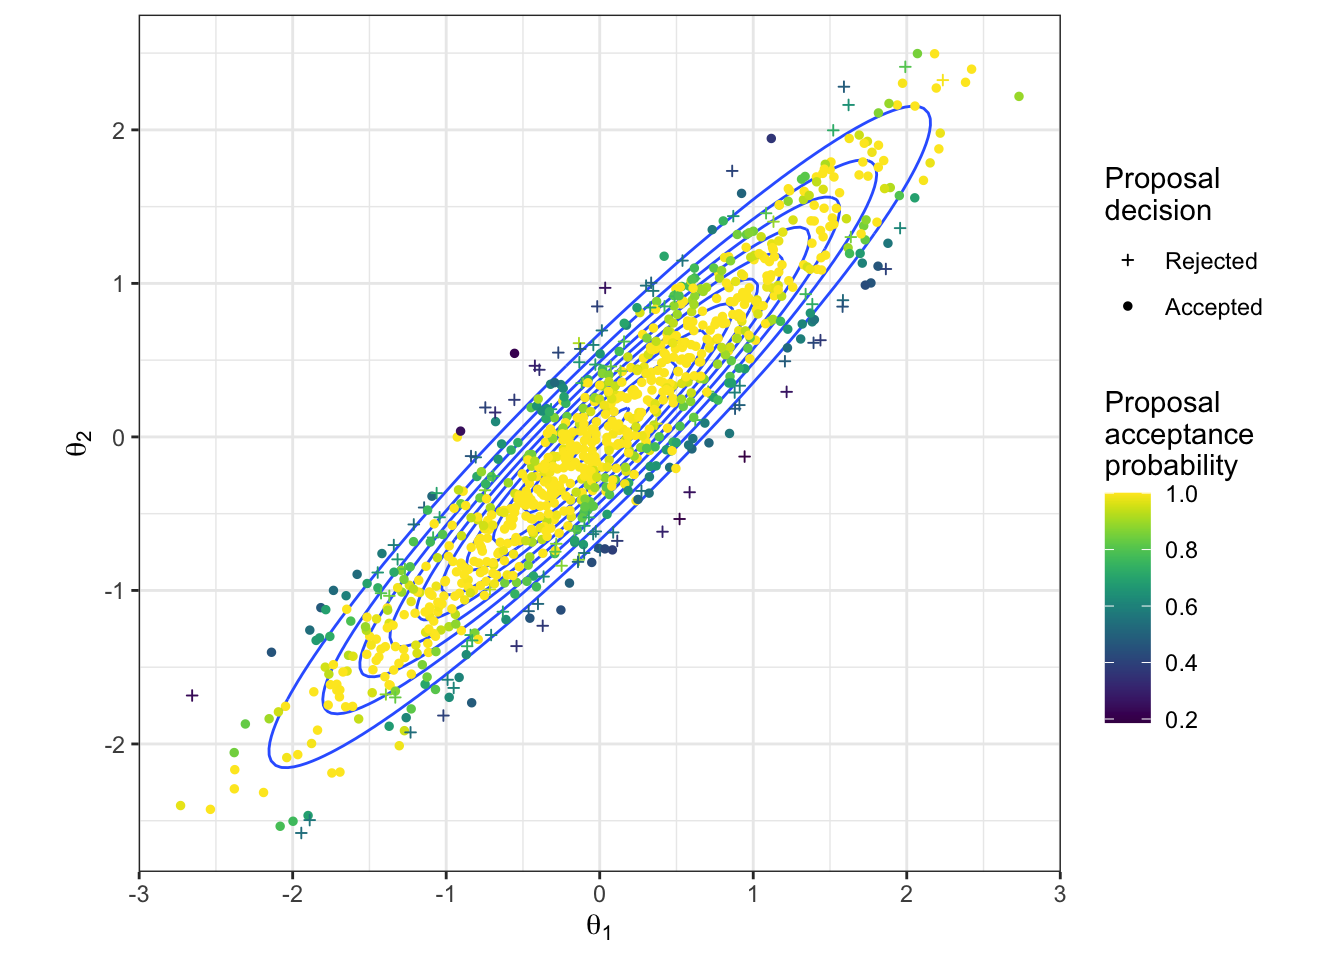 The proposed parameter values during a HMC algorithm to sample from a bivariate Gaussian. The true density is shown in blue. The proposed values are coloured according to their acceptance probability when proposed, and the point character gives the resulting acceptance decision.